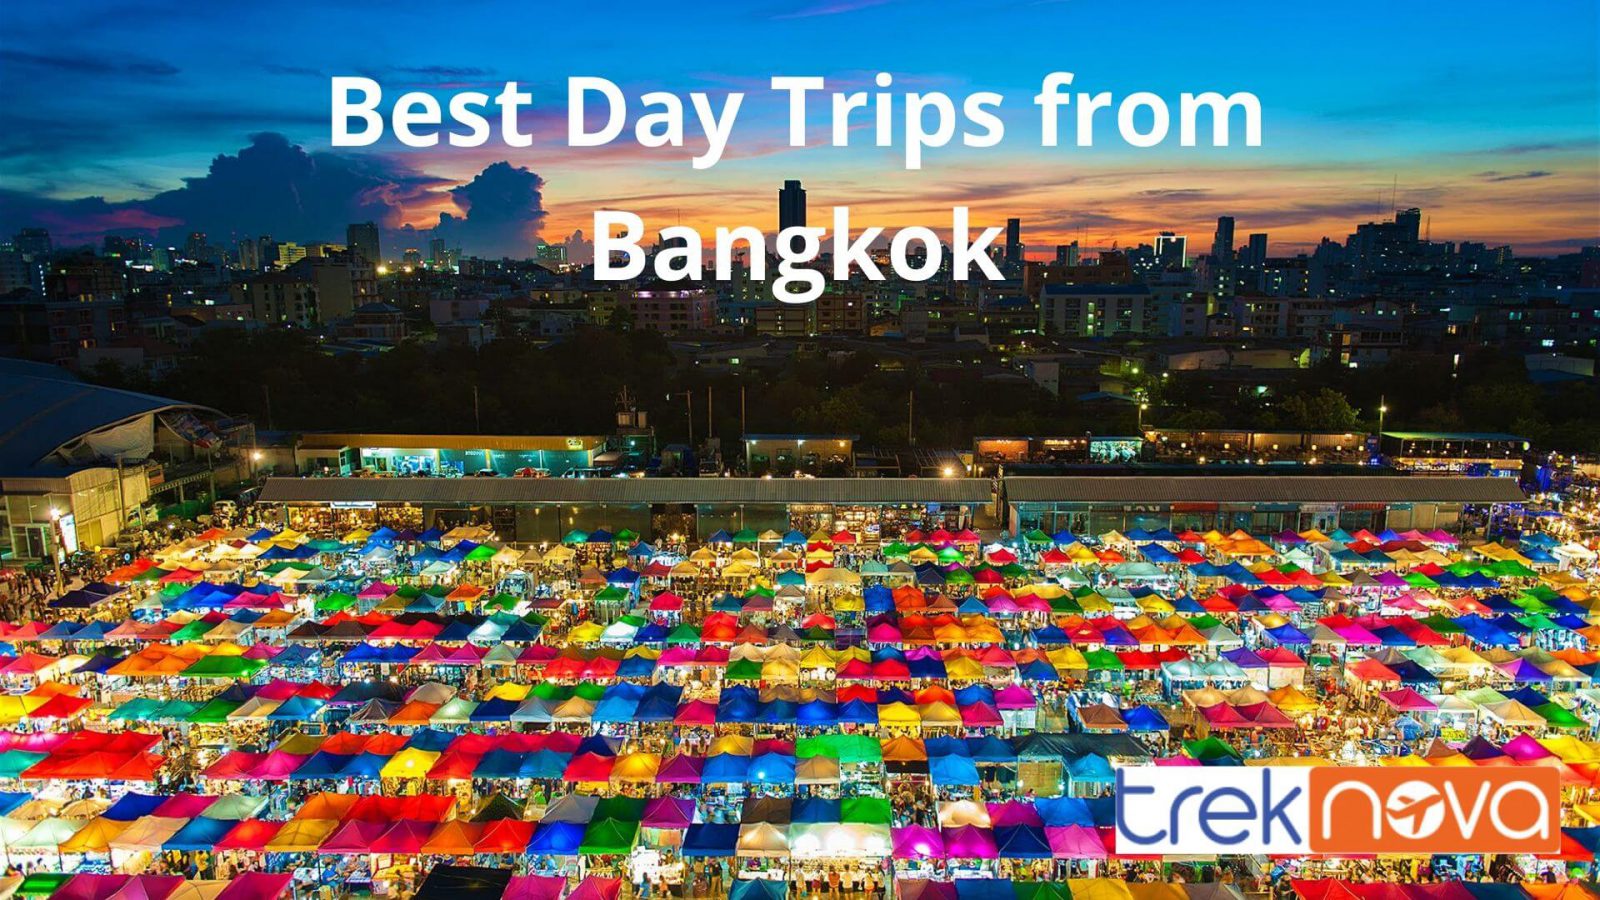 Best Day Trips from Bangkok